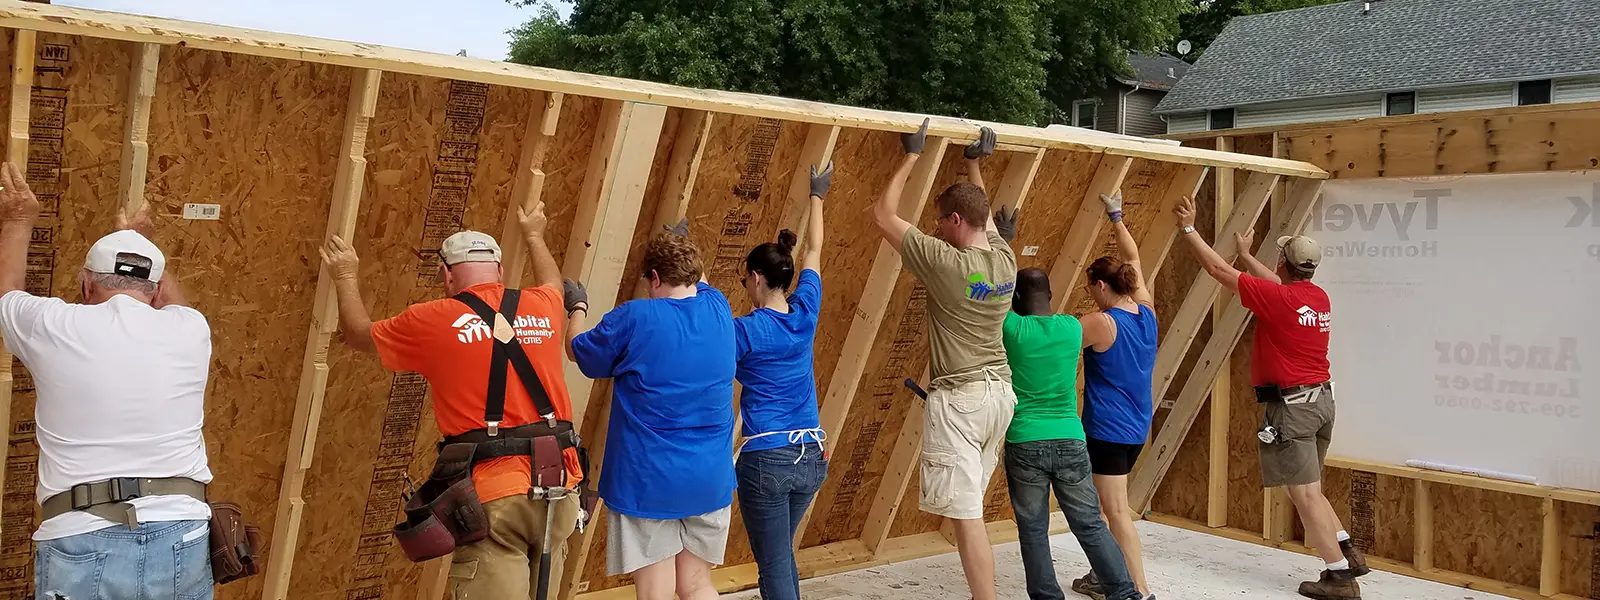 Moline Employees Participate in Habitat for Humanity Build